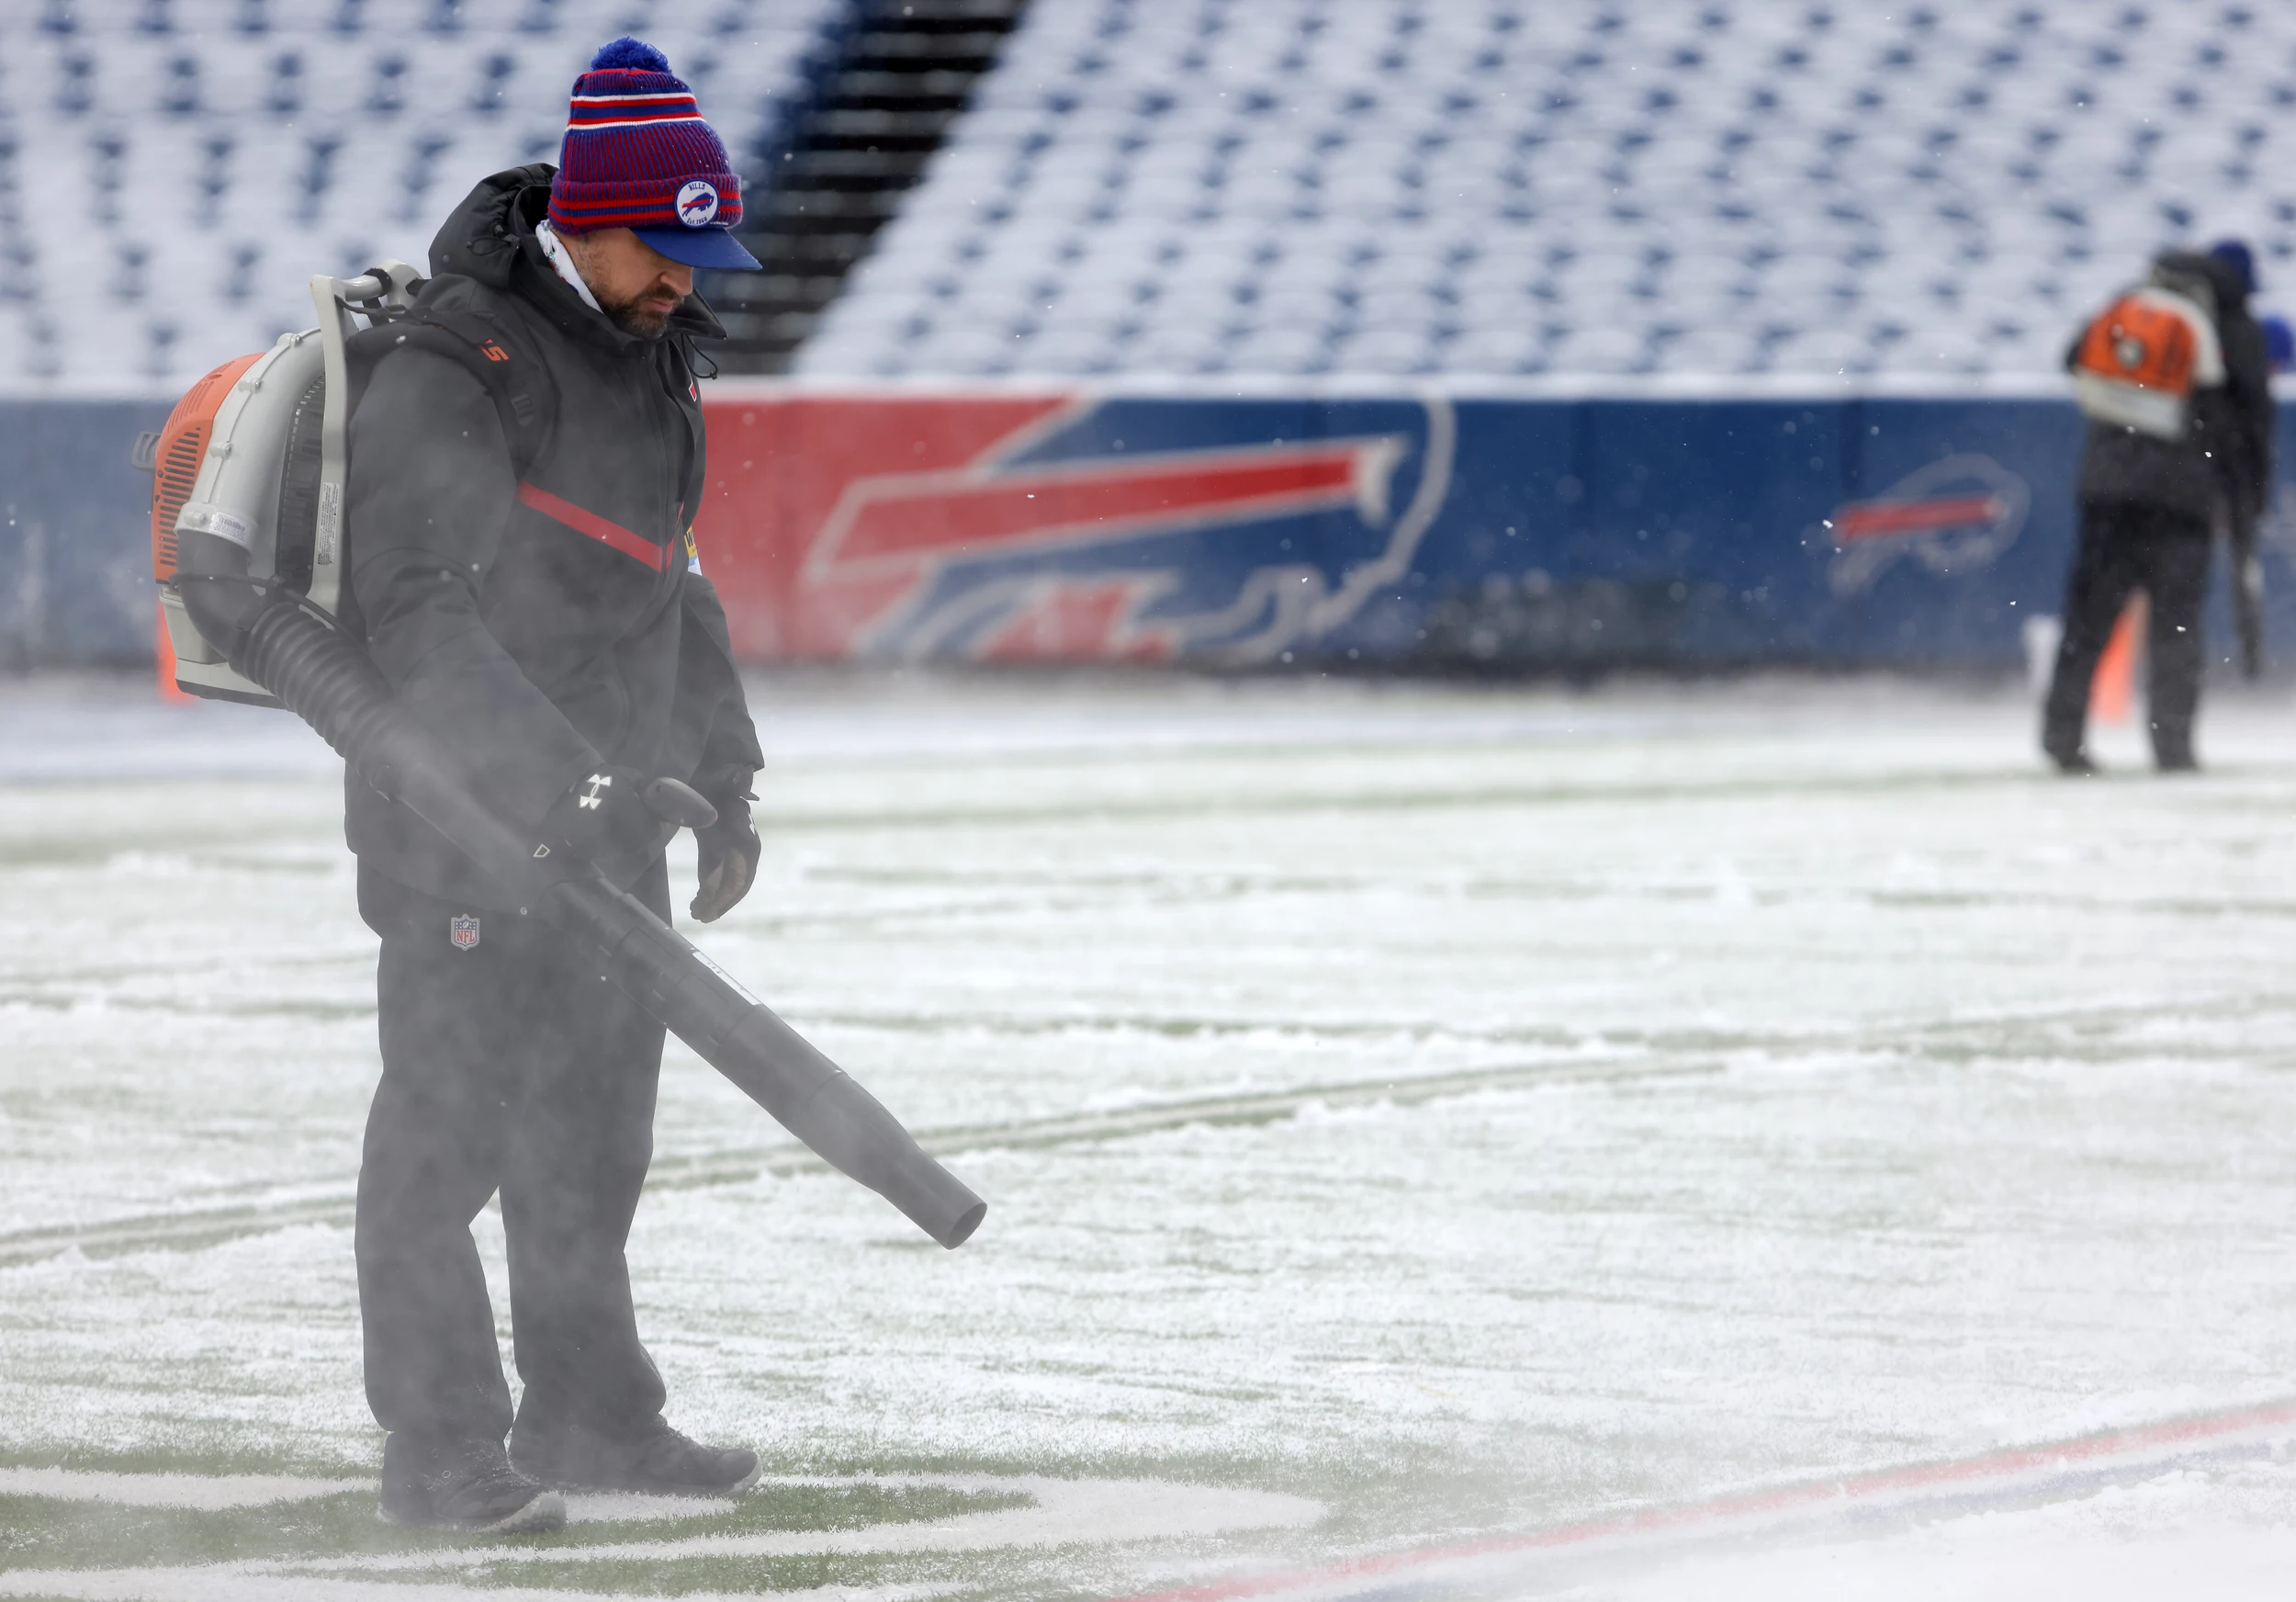 Buffalo Bills Game at Home is Canceled, Moved To Detroit